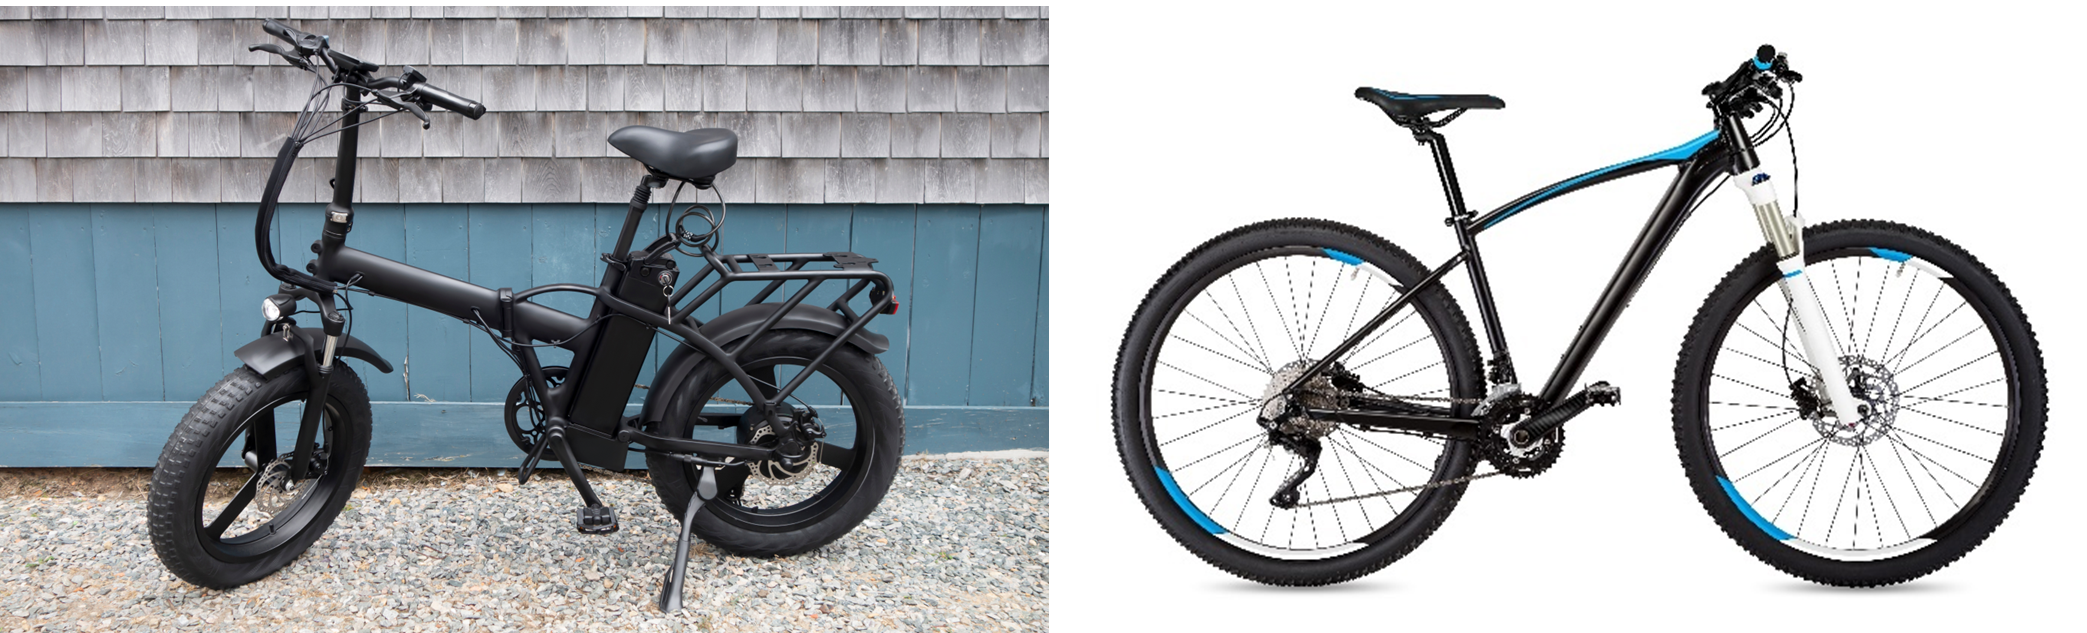 Figure 2: A 750w e-bike on the left and an unpowered bicycle on the right